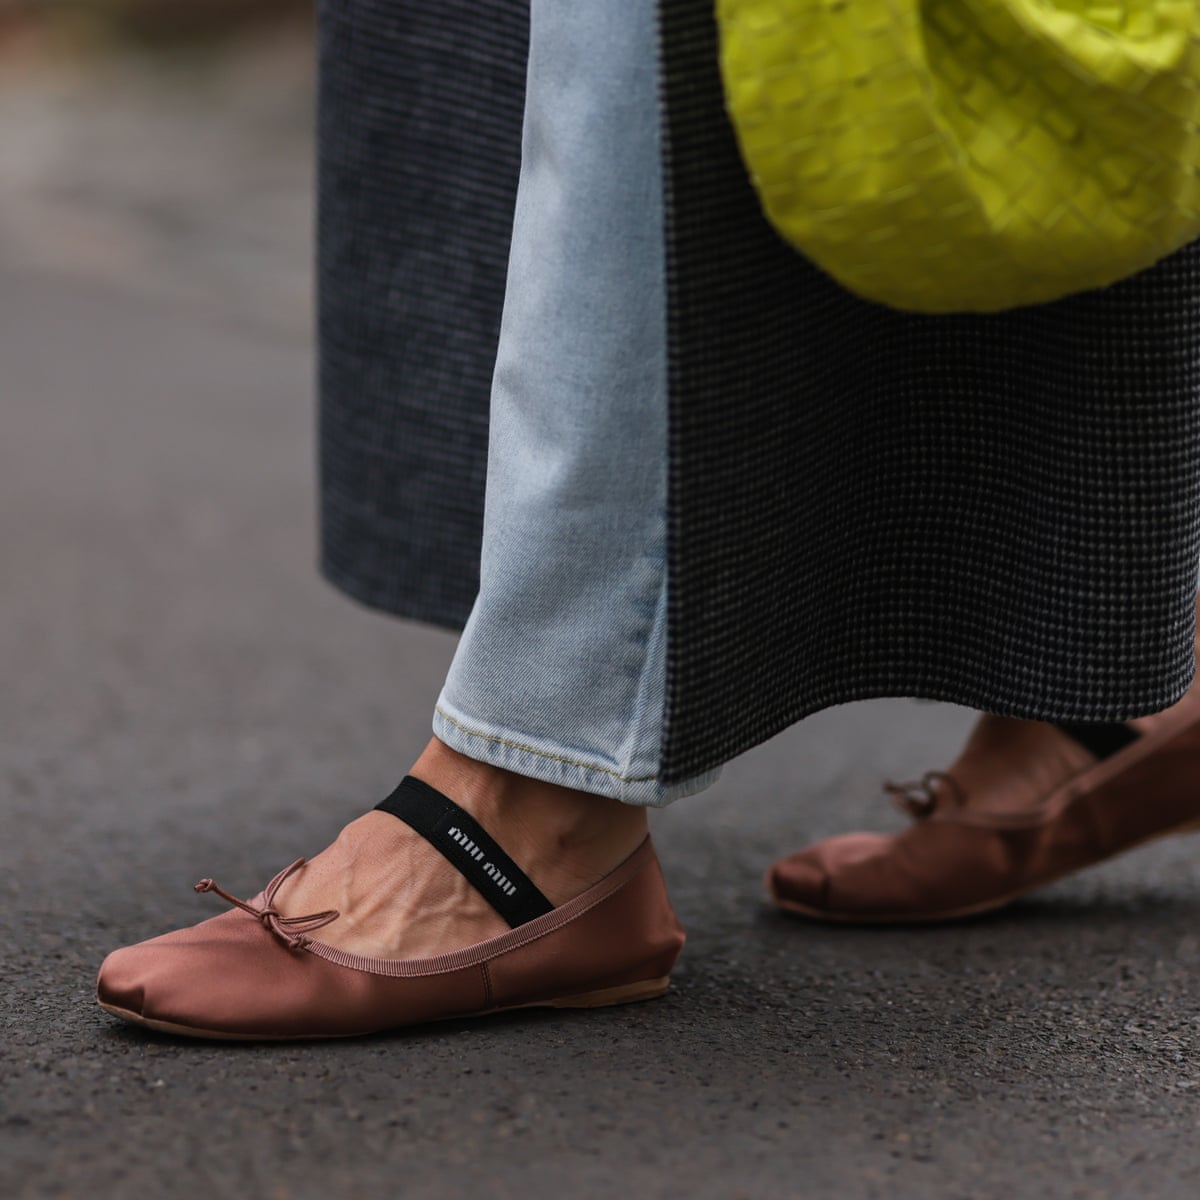 the return of the ballet flat